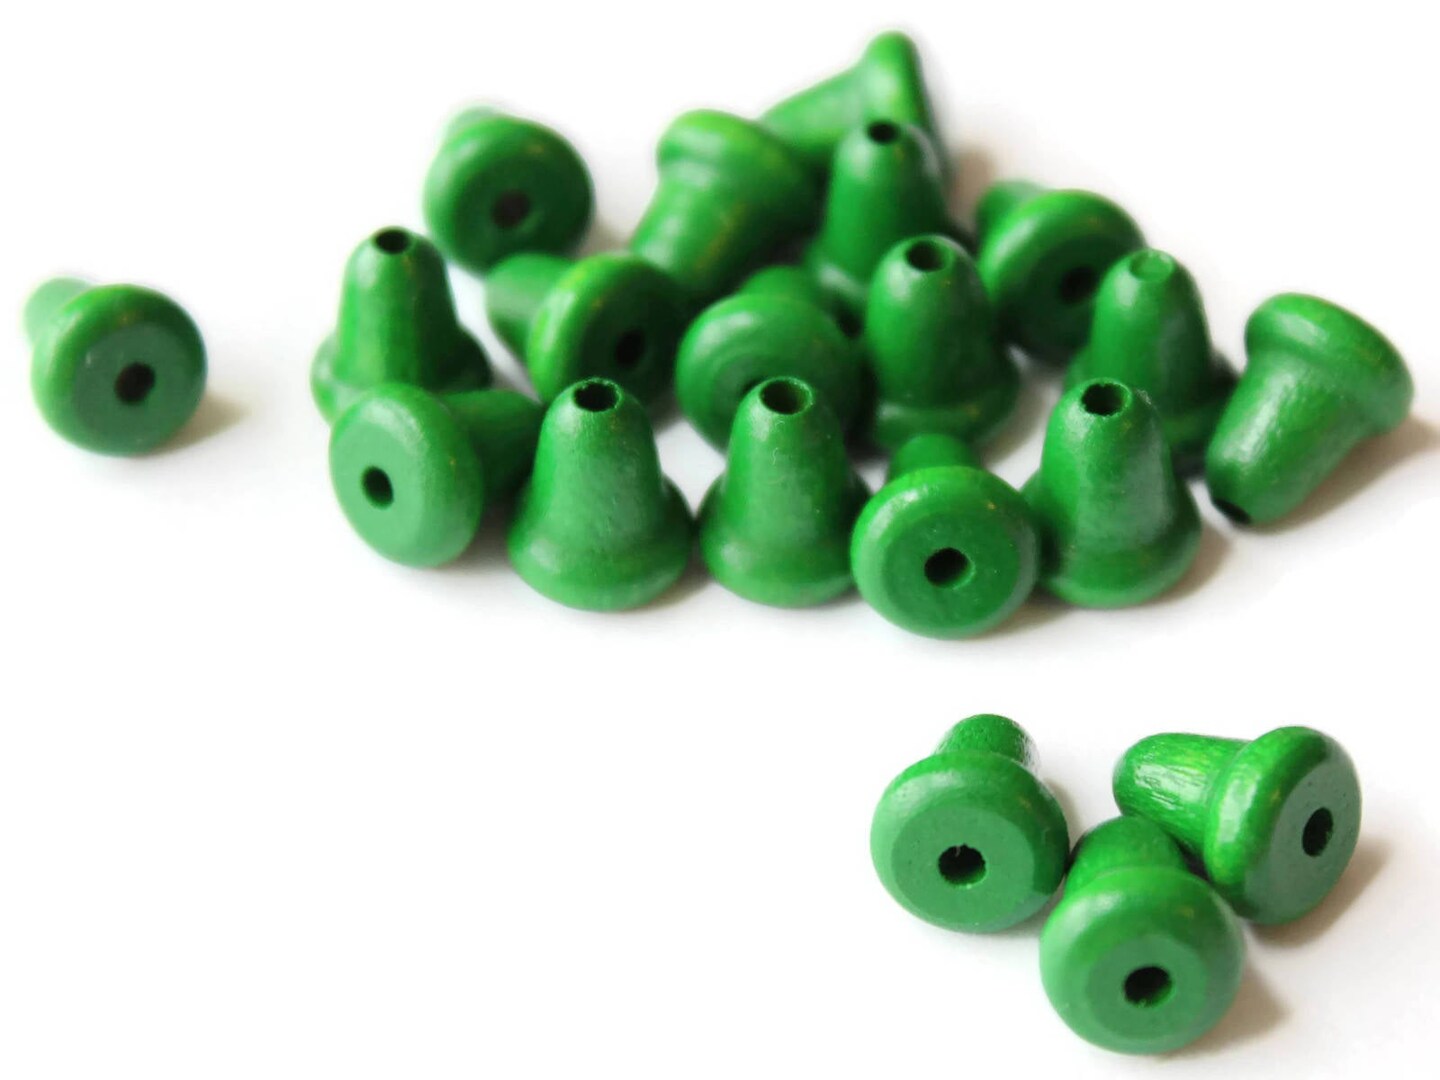 20 11mm Green Wooden Bell Beads Vintage Wood End Beads Loose Bell Shaped Beads